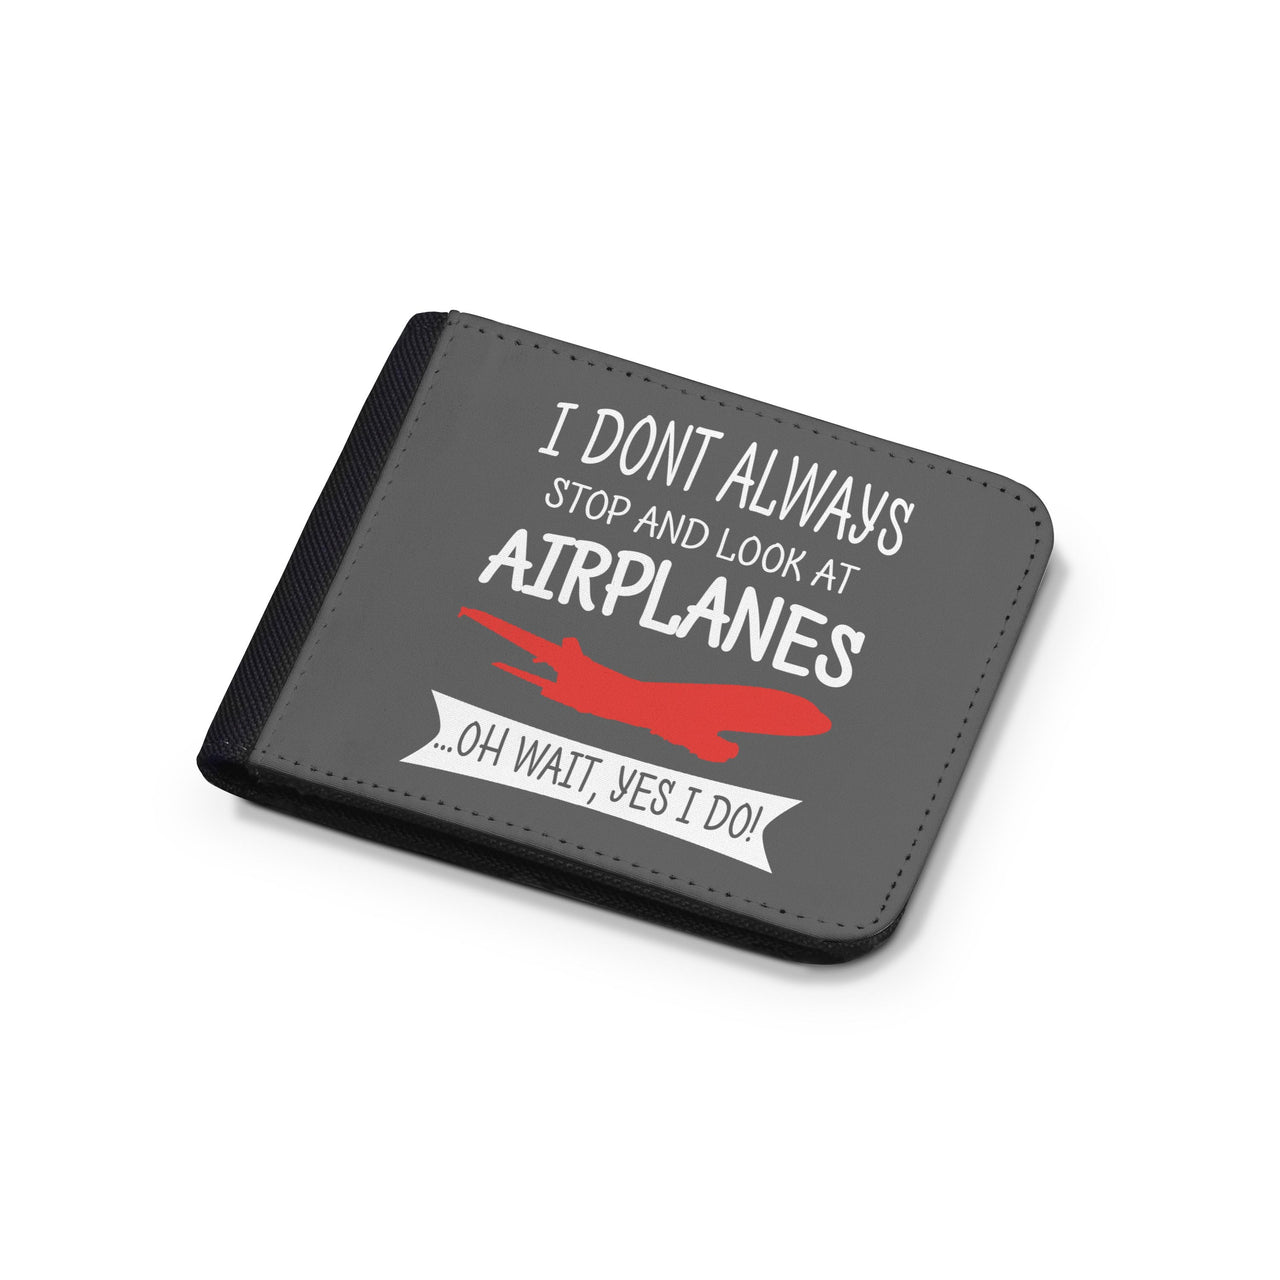 I Don't Always Stop and Look at Airplanes Designed Wallets